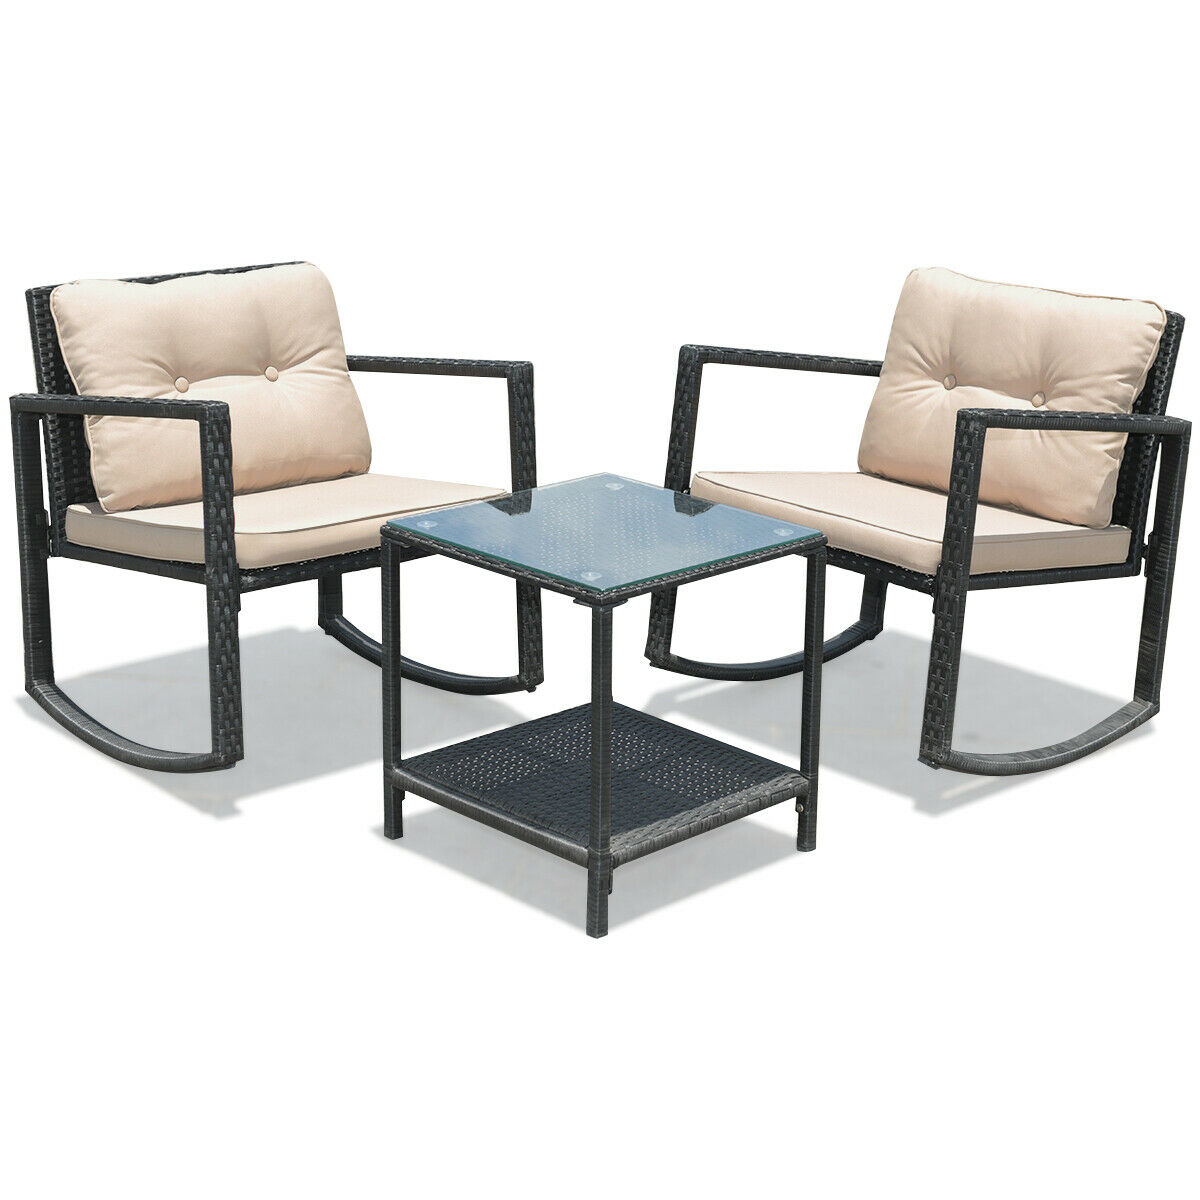 Gymax Set of 3 Rattan Rocking Chair Cushioned Sofa Unit Garden Patio Furniture - image 5 of 7